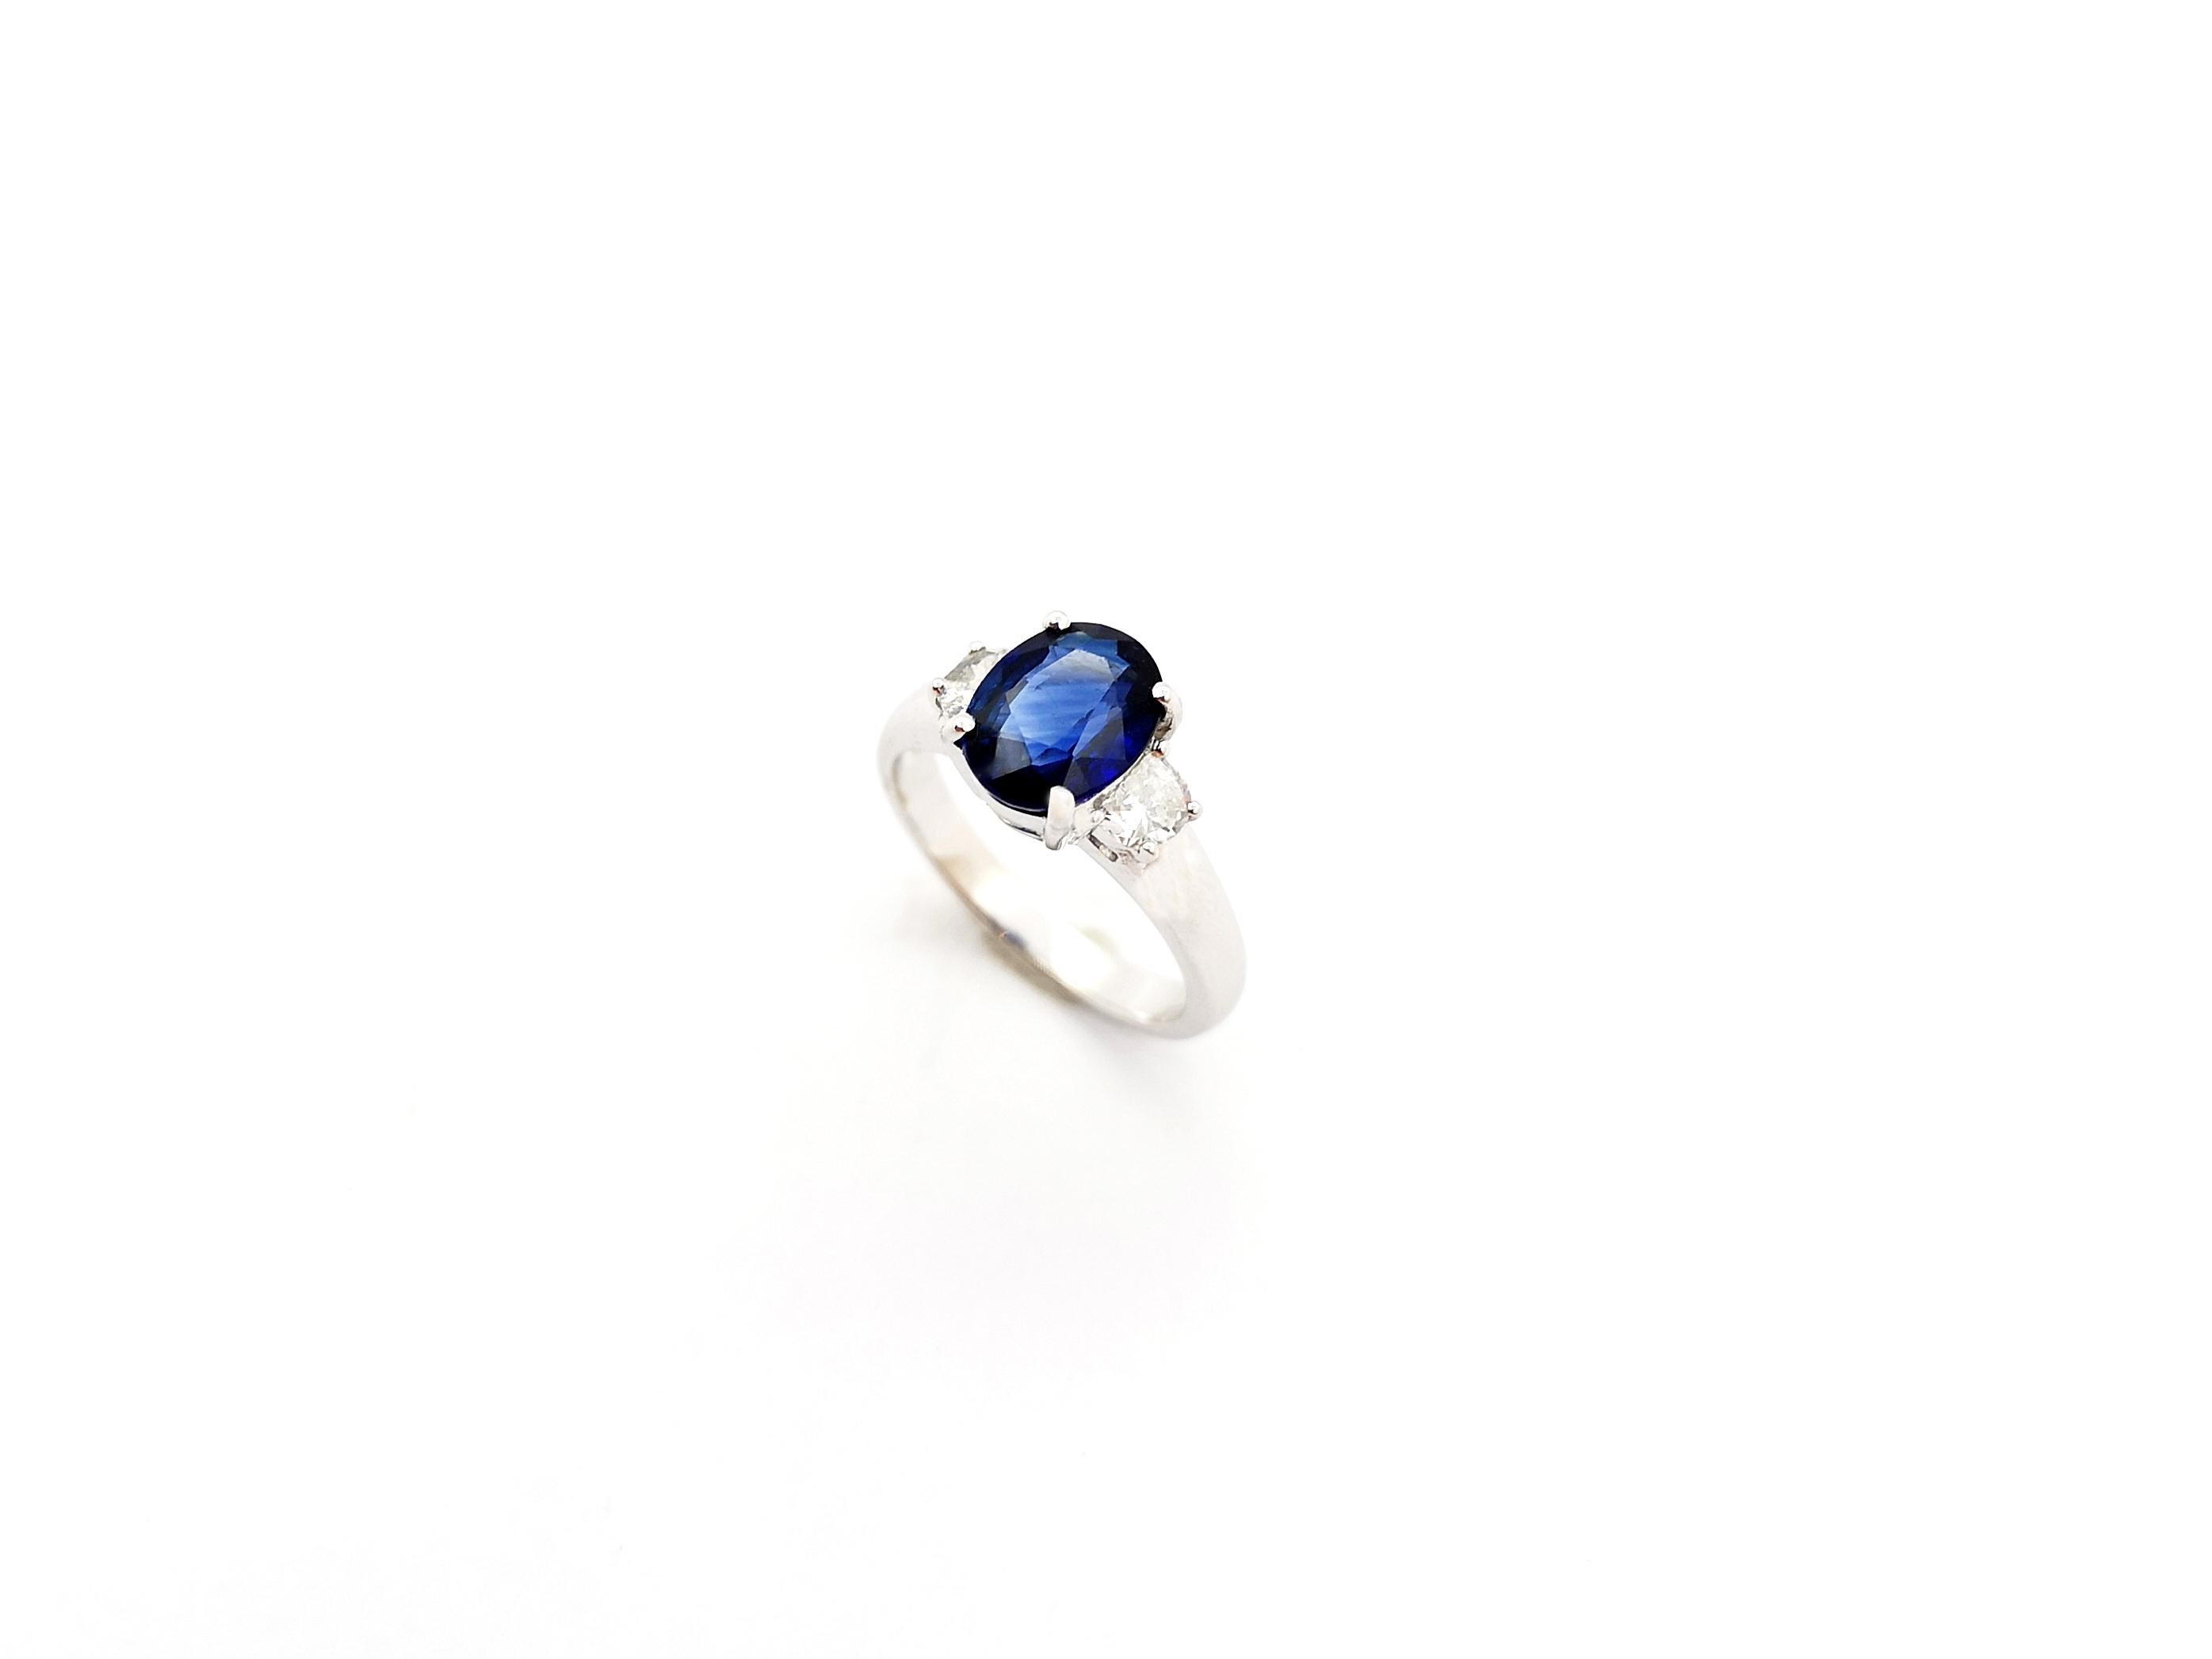 GIA Certified Blue Sapphire with Diamond Ring set in Platinum 950 Settings For Sale 12